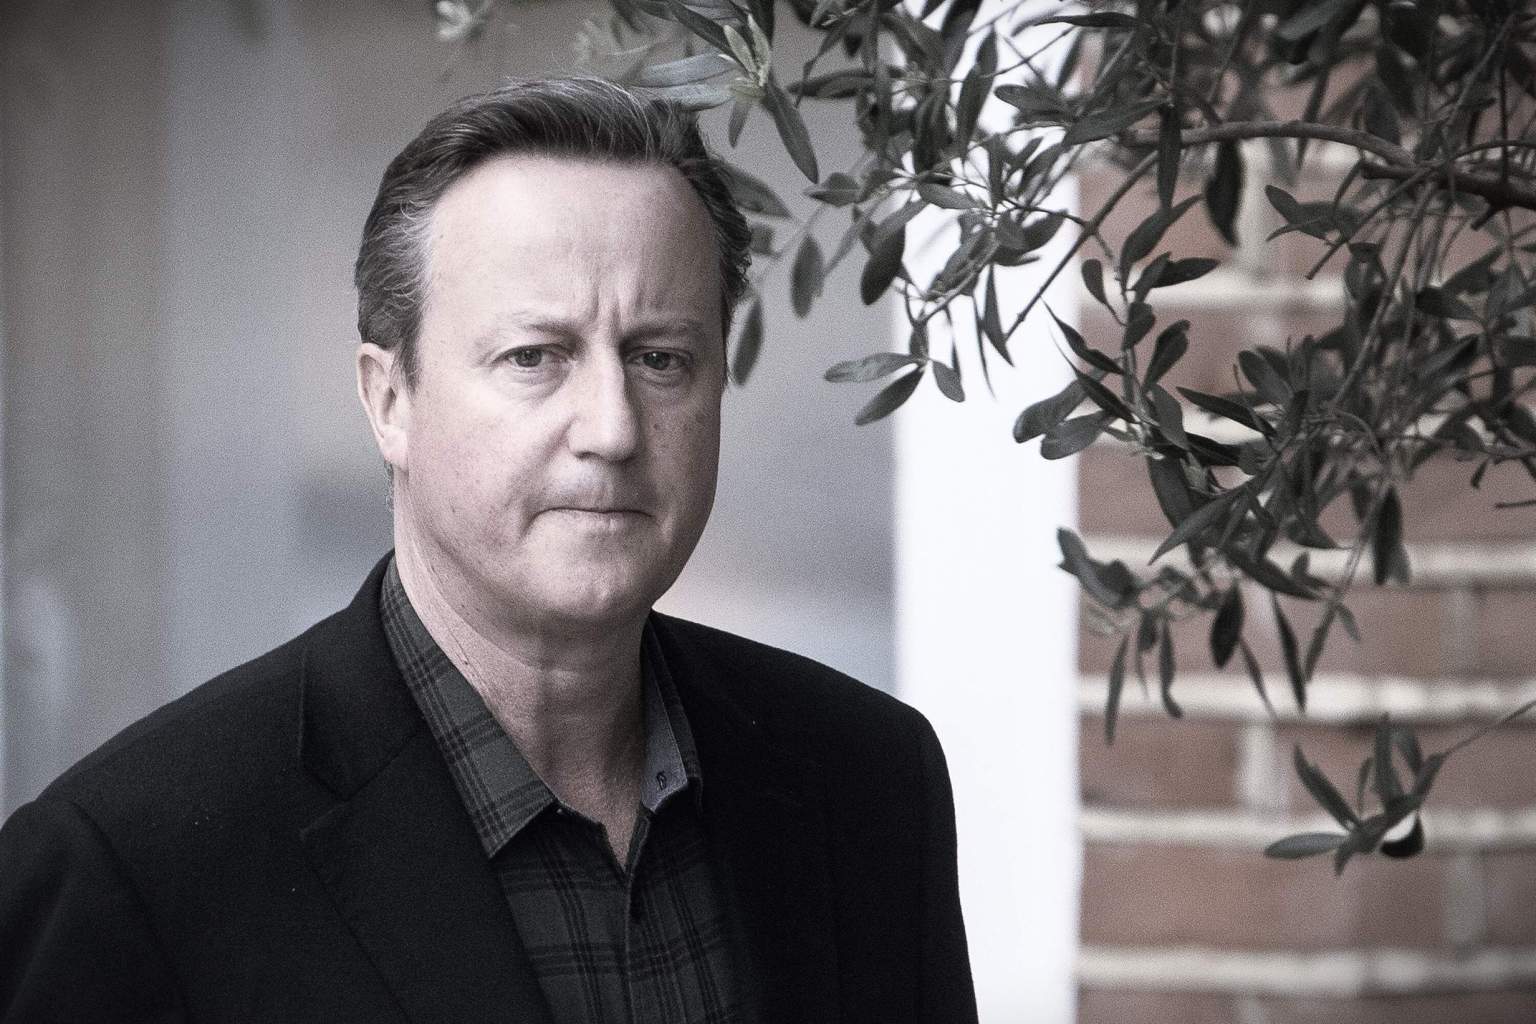 David Cameron Endorses Report Tied to Man he Called ‘Muslim No Go Zone’ “Idiot” and ‘Neo Nazi’ Party